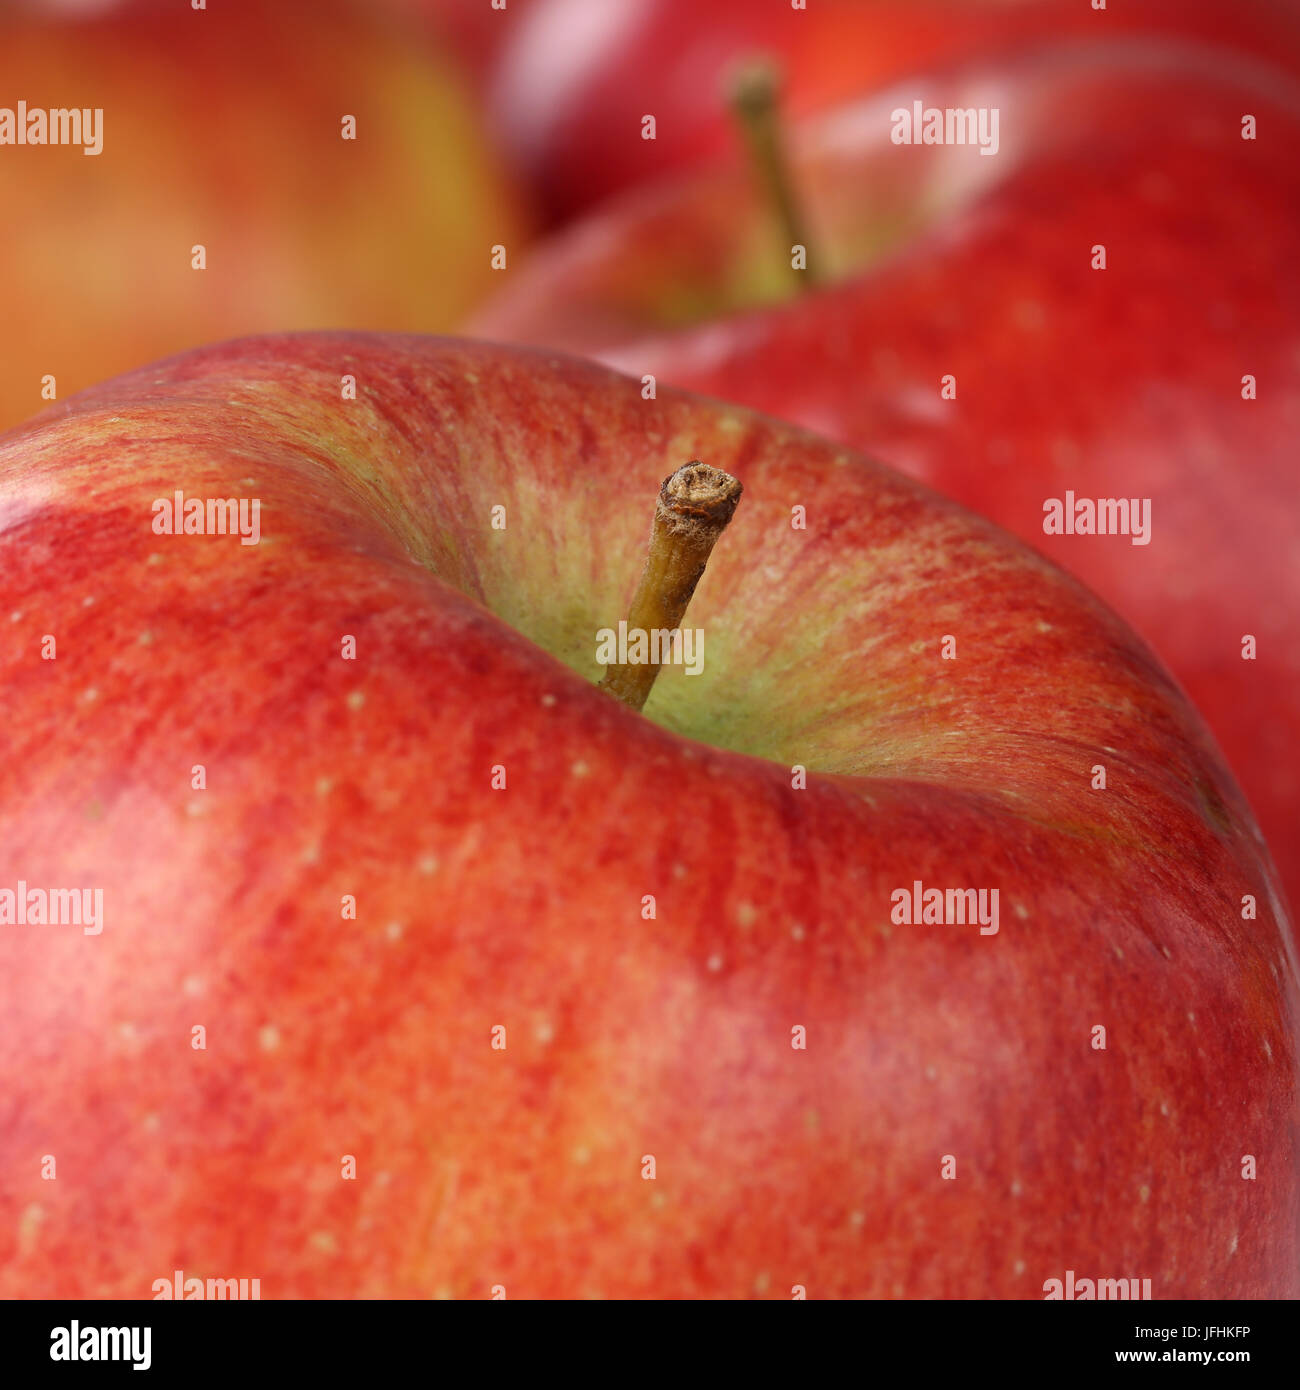 Roter Apfel Obst Frucht Foto Stock